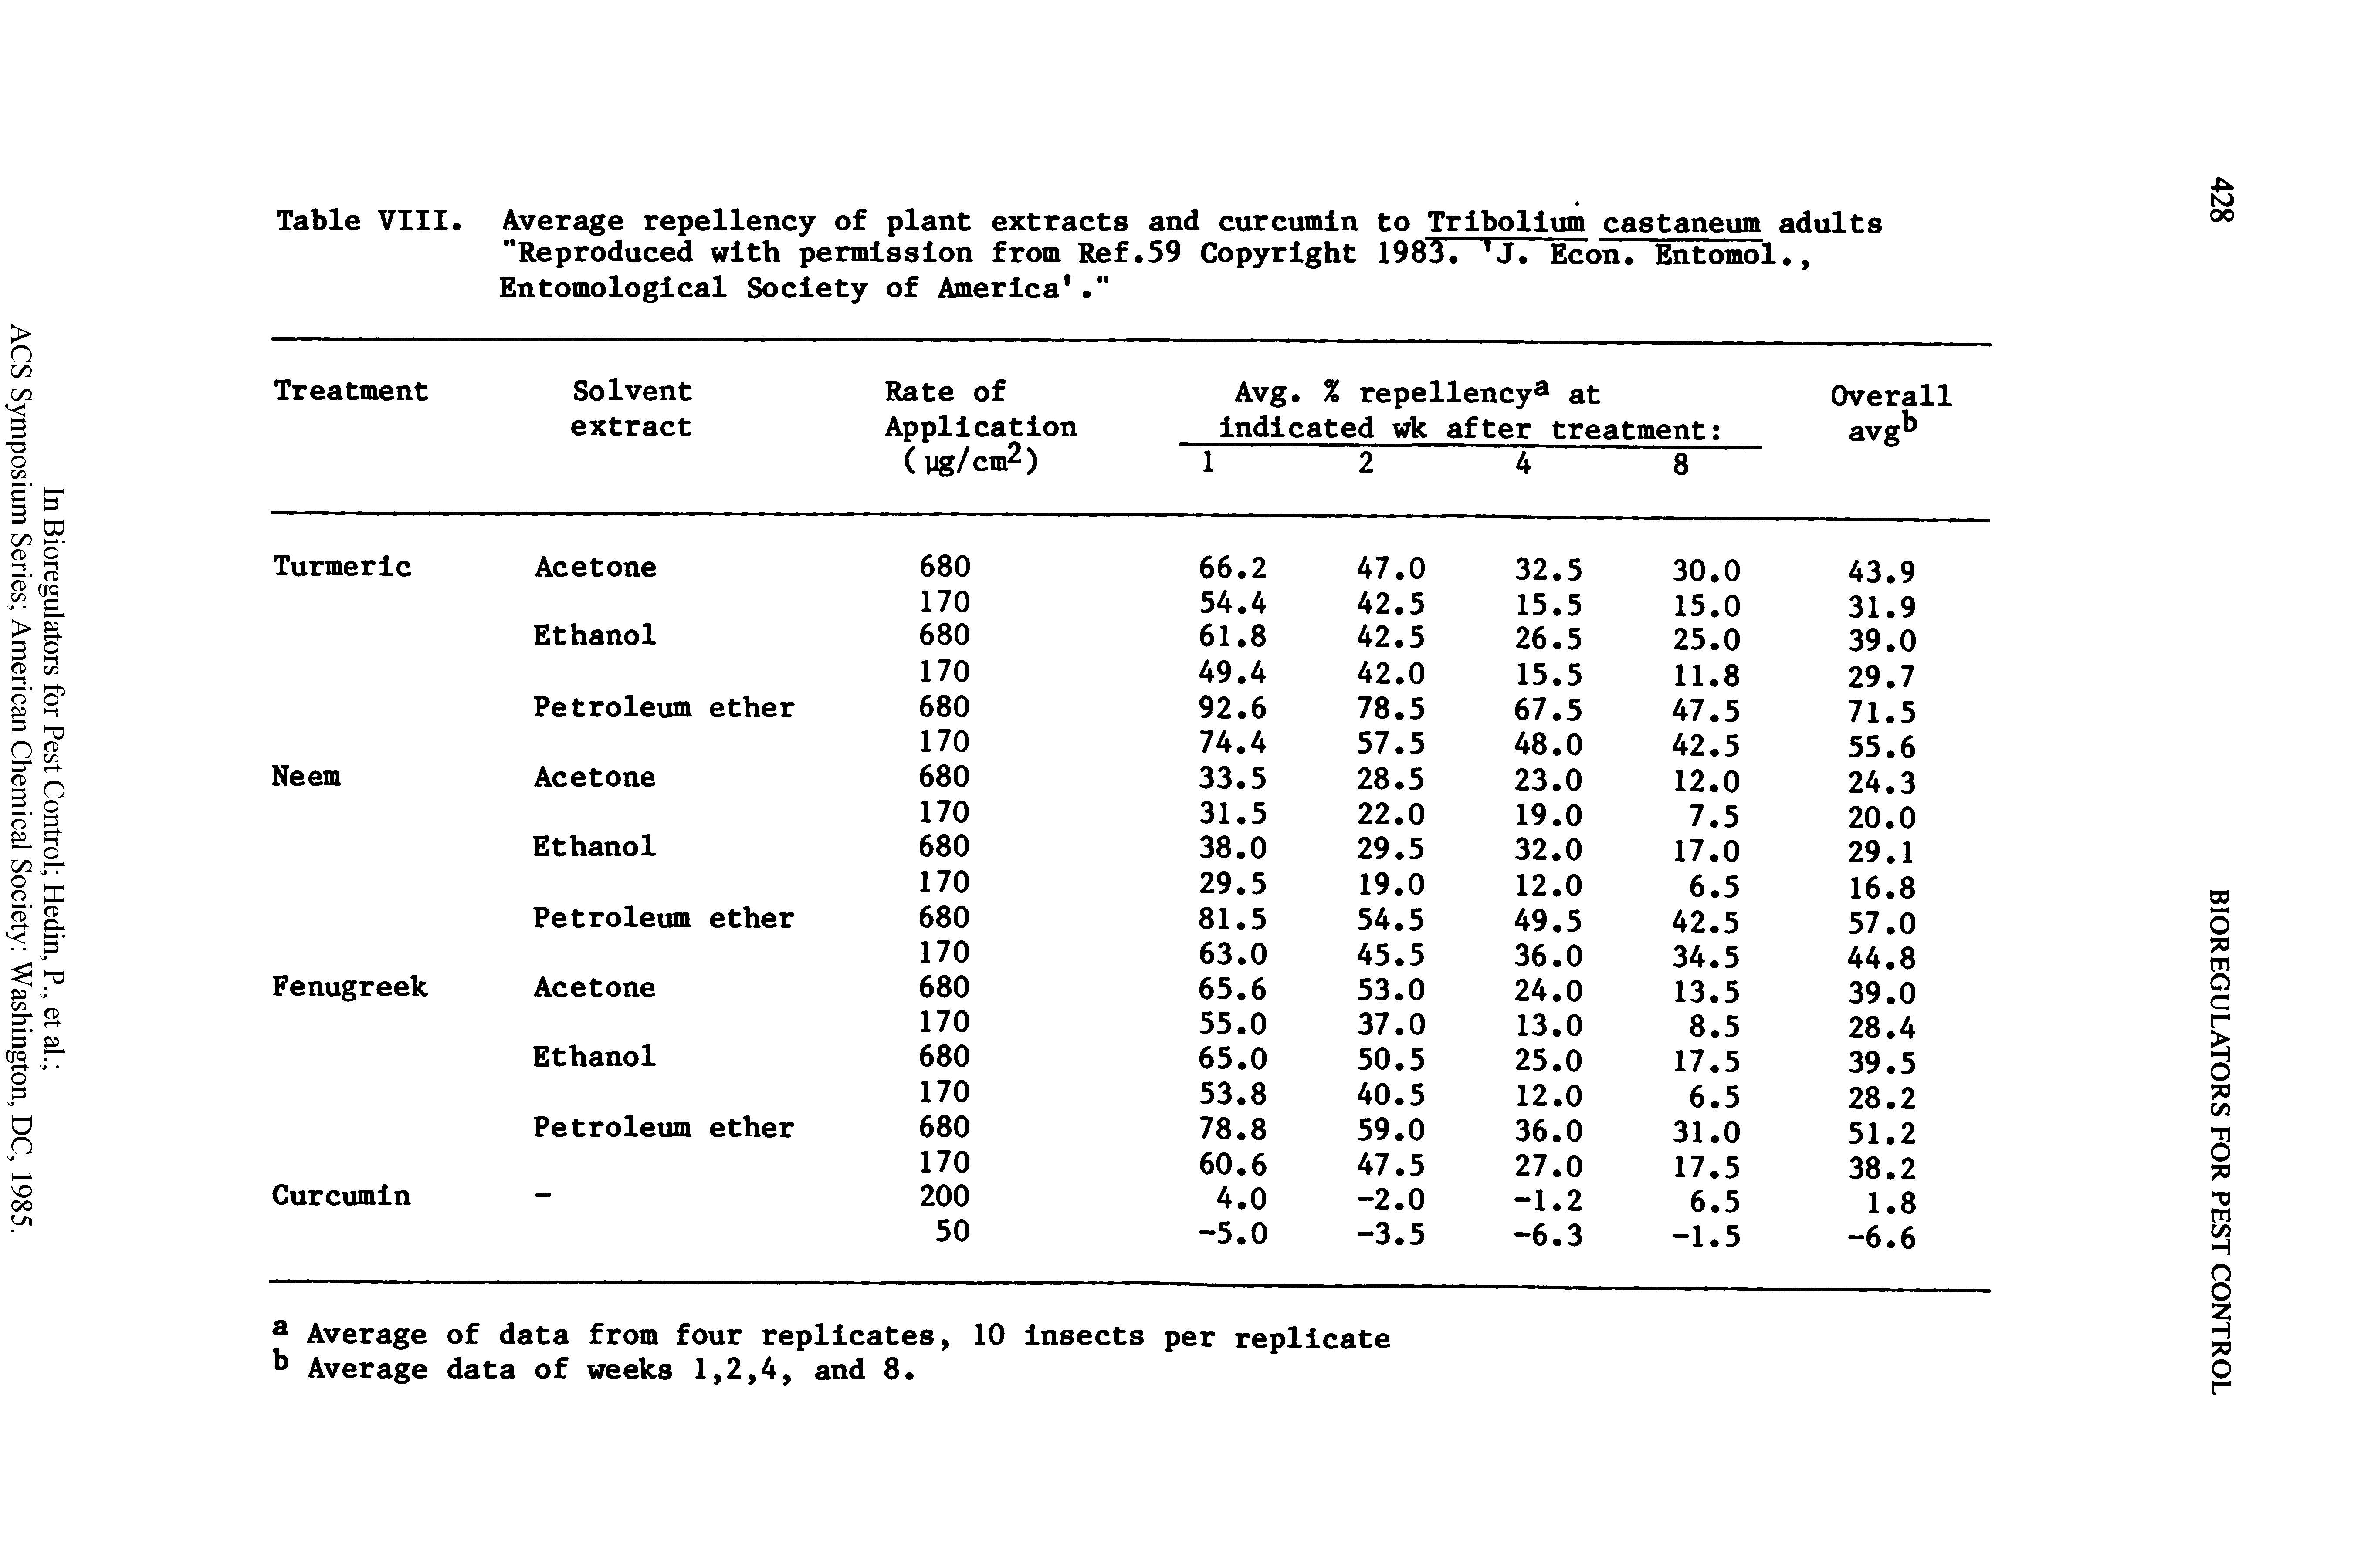 Table VIII. Average repellency of plant extracts and curcumin to Tribolium castaneum adults "Reproduced with permission from Ref.59 Copyright 1983. TJ. Econ. Entomol., Entomological Society of America ...